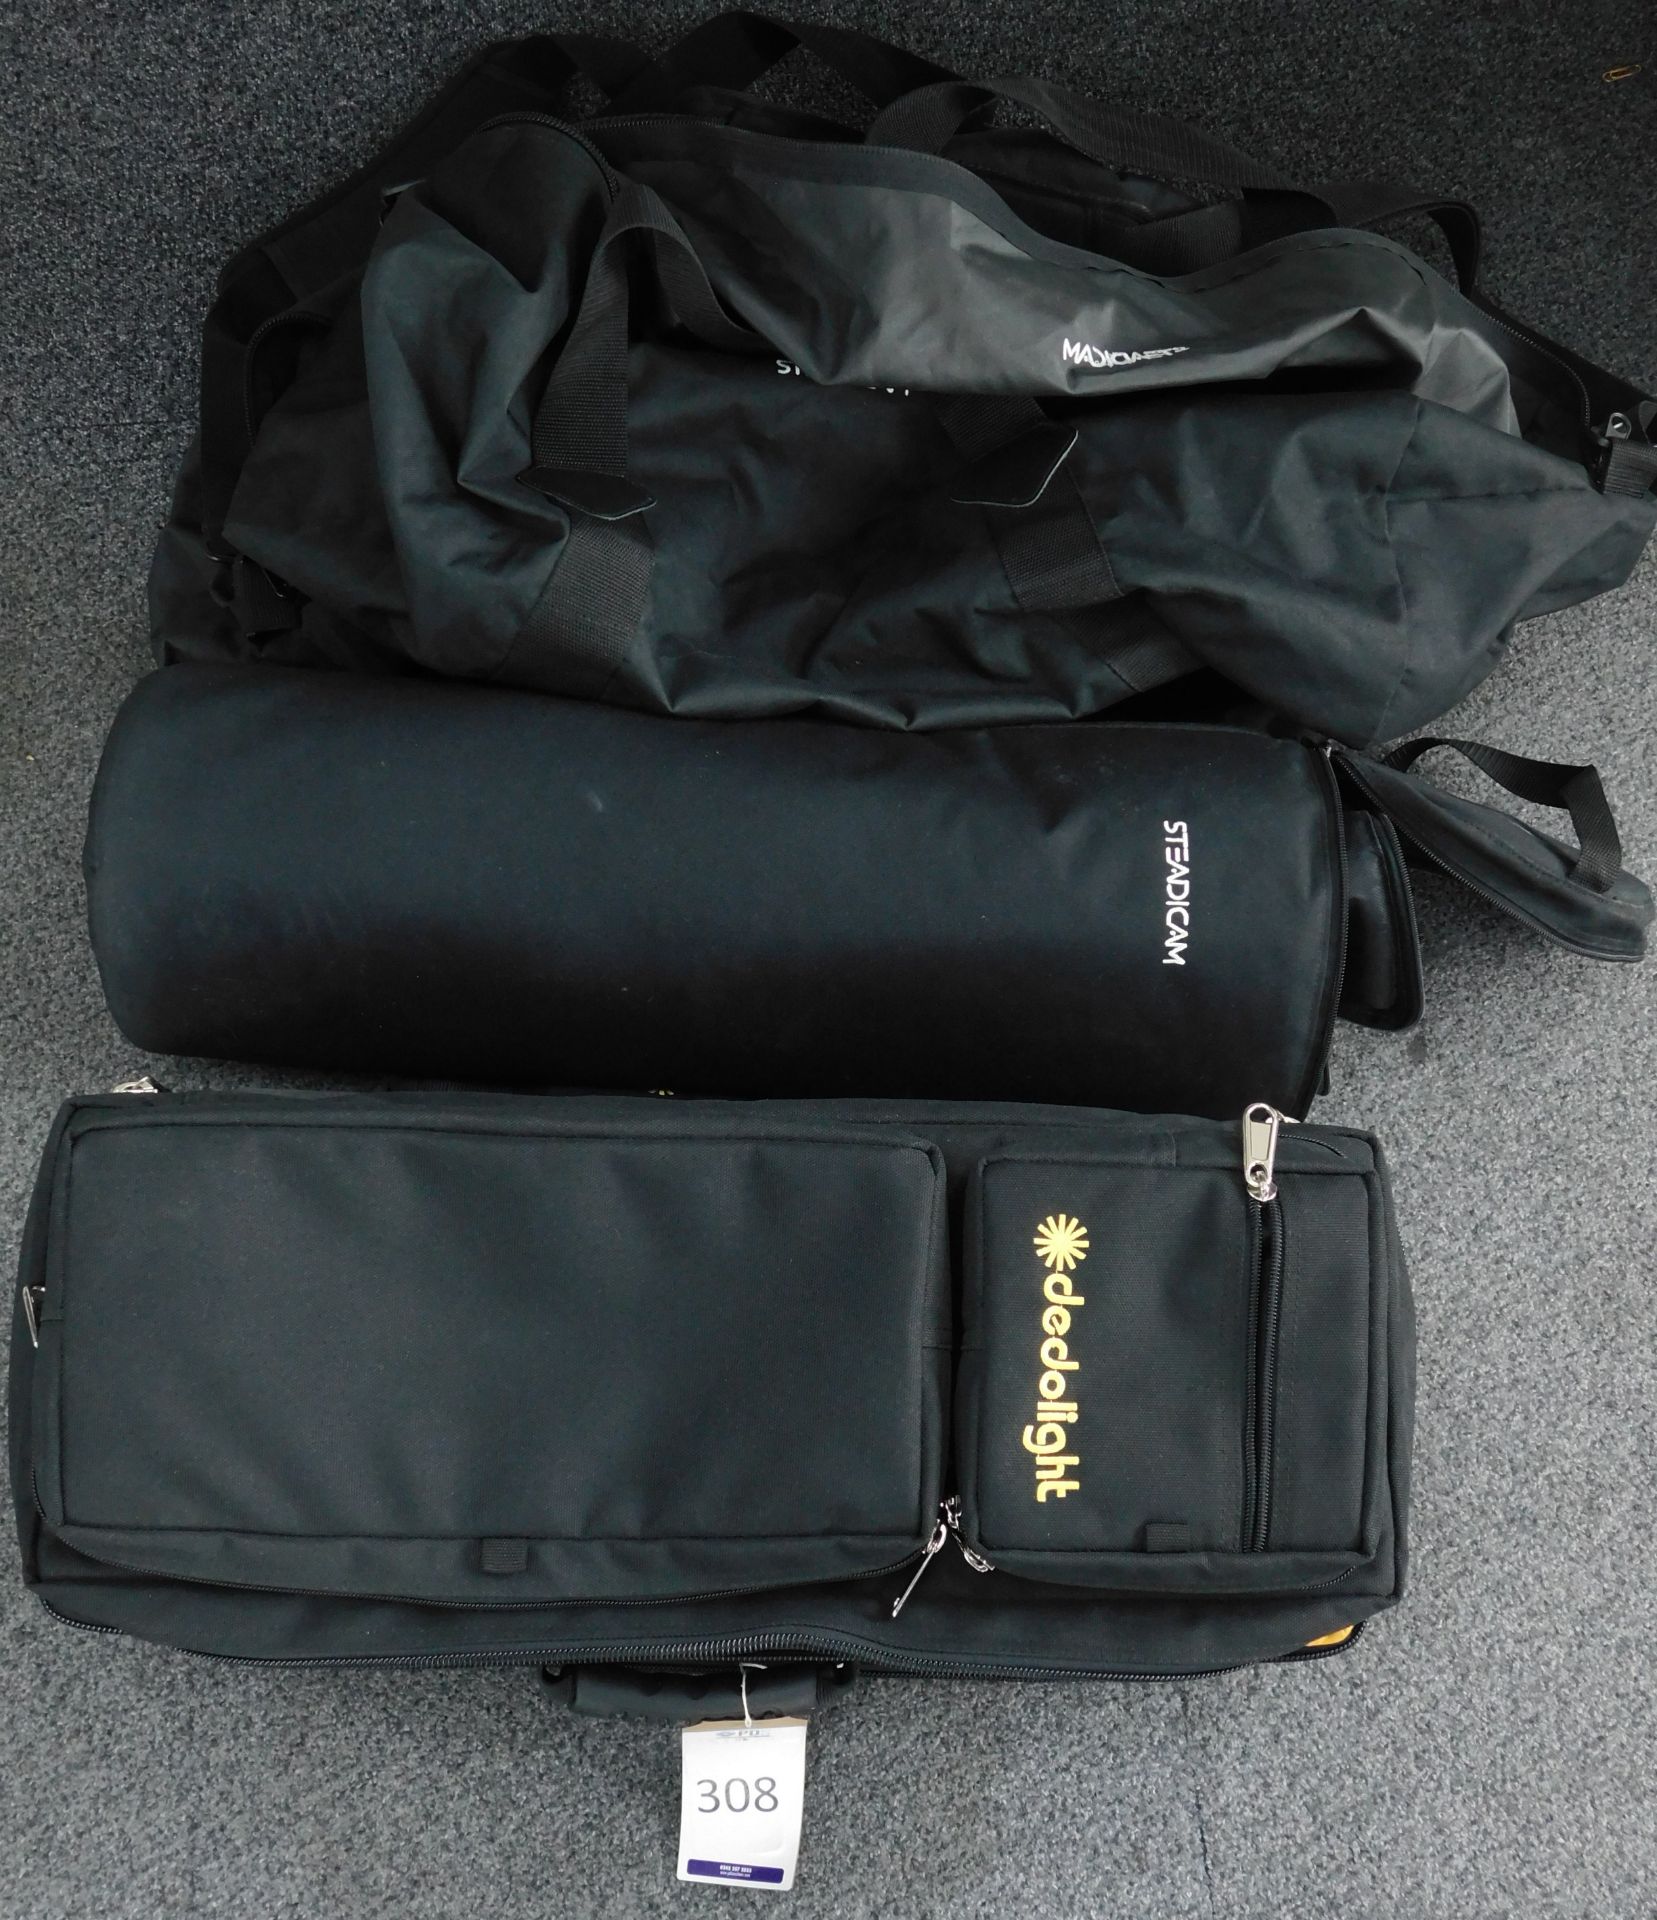 Dedolight Lighting Bag and Three Steadicam Bags (Location: Westminster. Please Refer to General